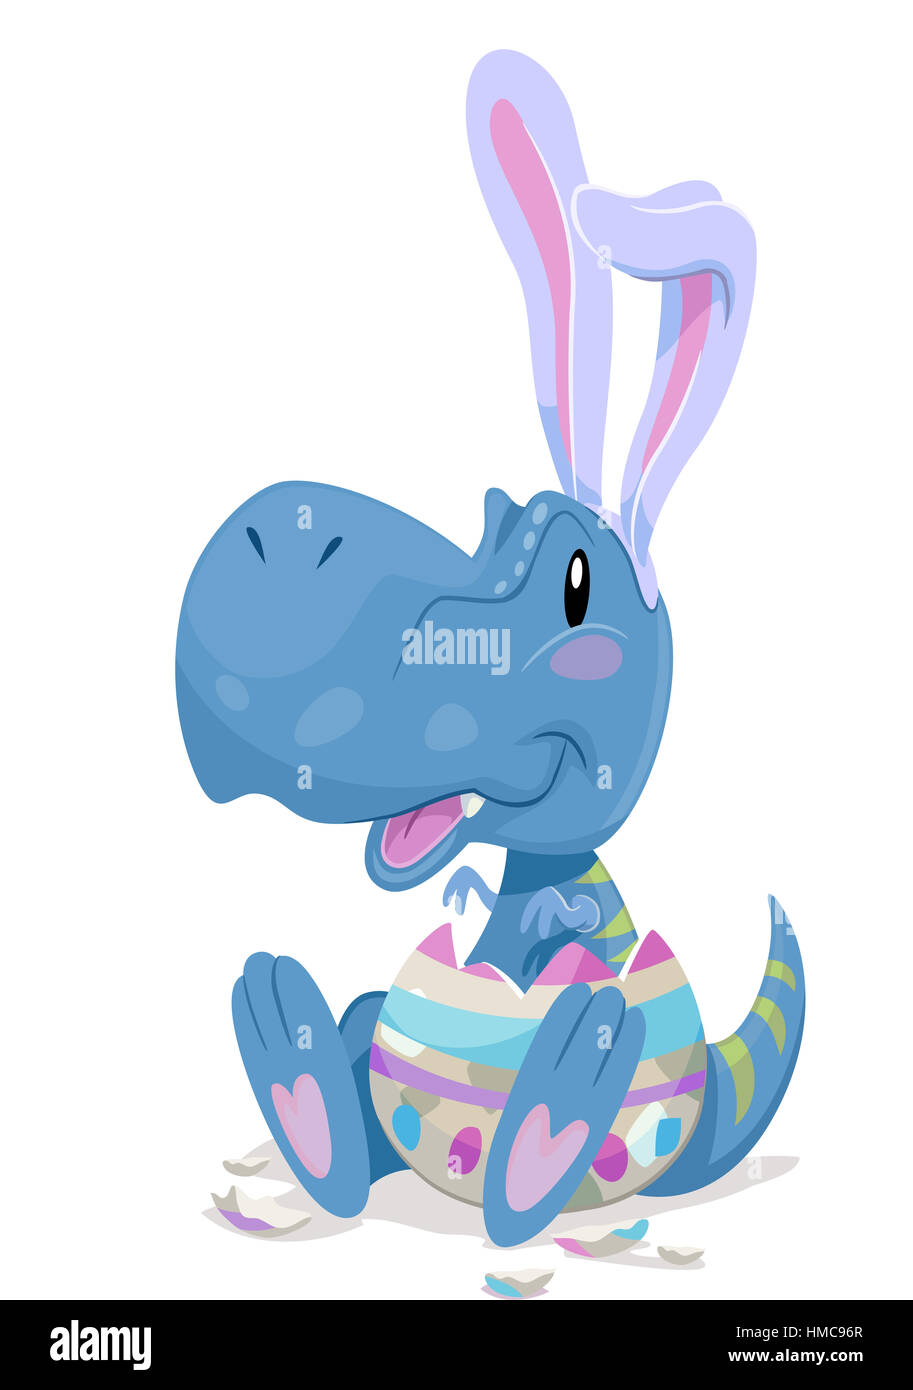 Dinosaur Illustration of a Baby Tyrannosaur in Bunny Ears Hatching from an Easter Egg Stock Photo